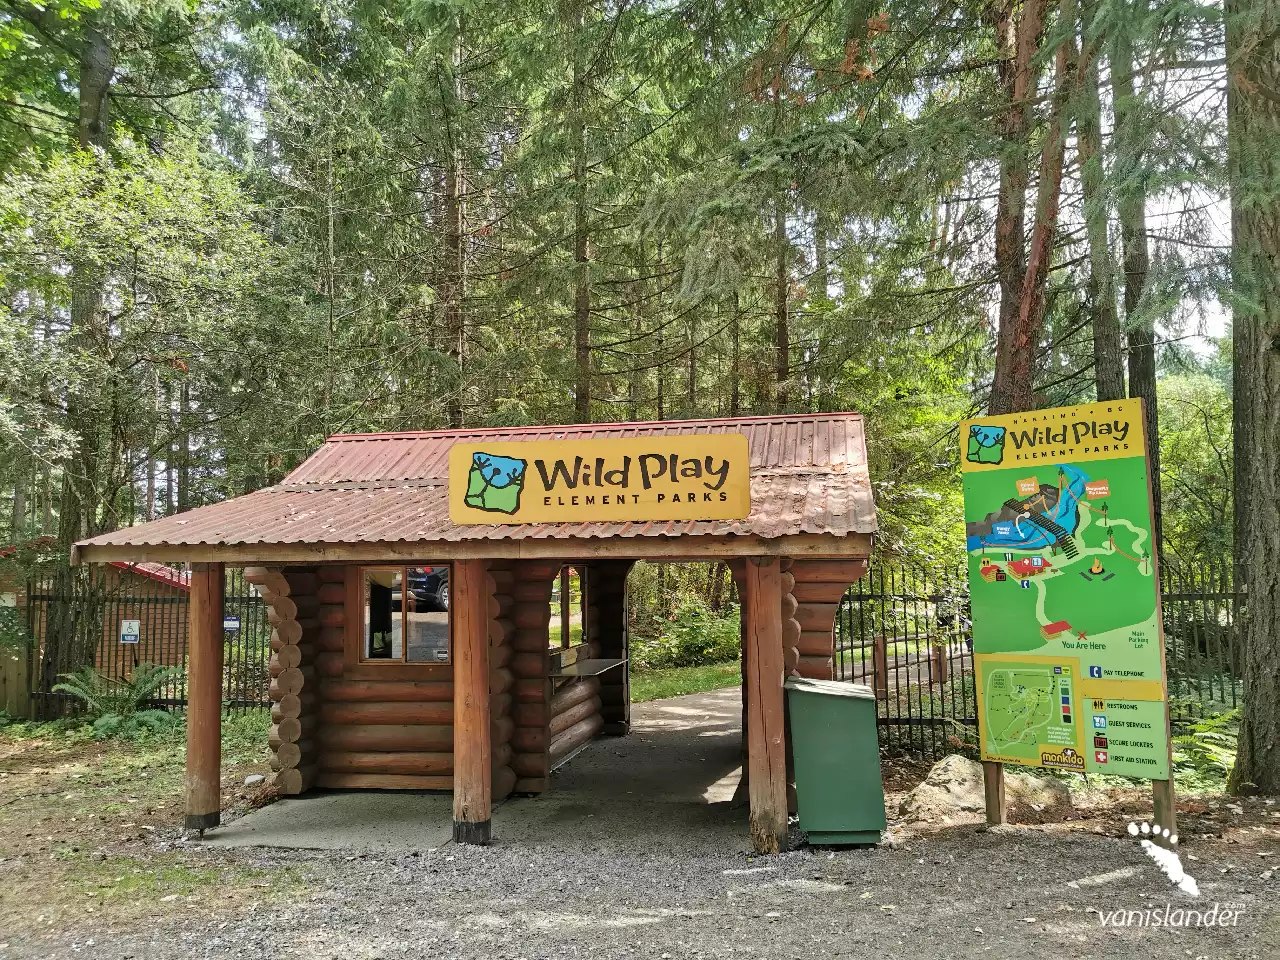 Wild play element parks entrance in Nanaimo,  Vancouver Island